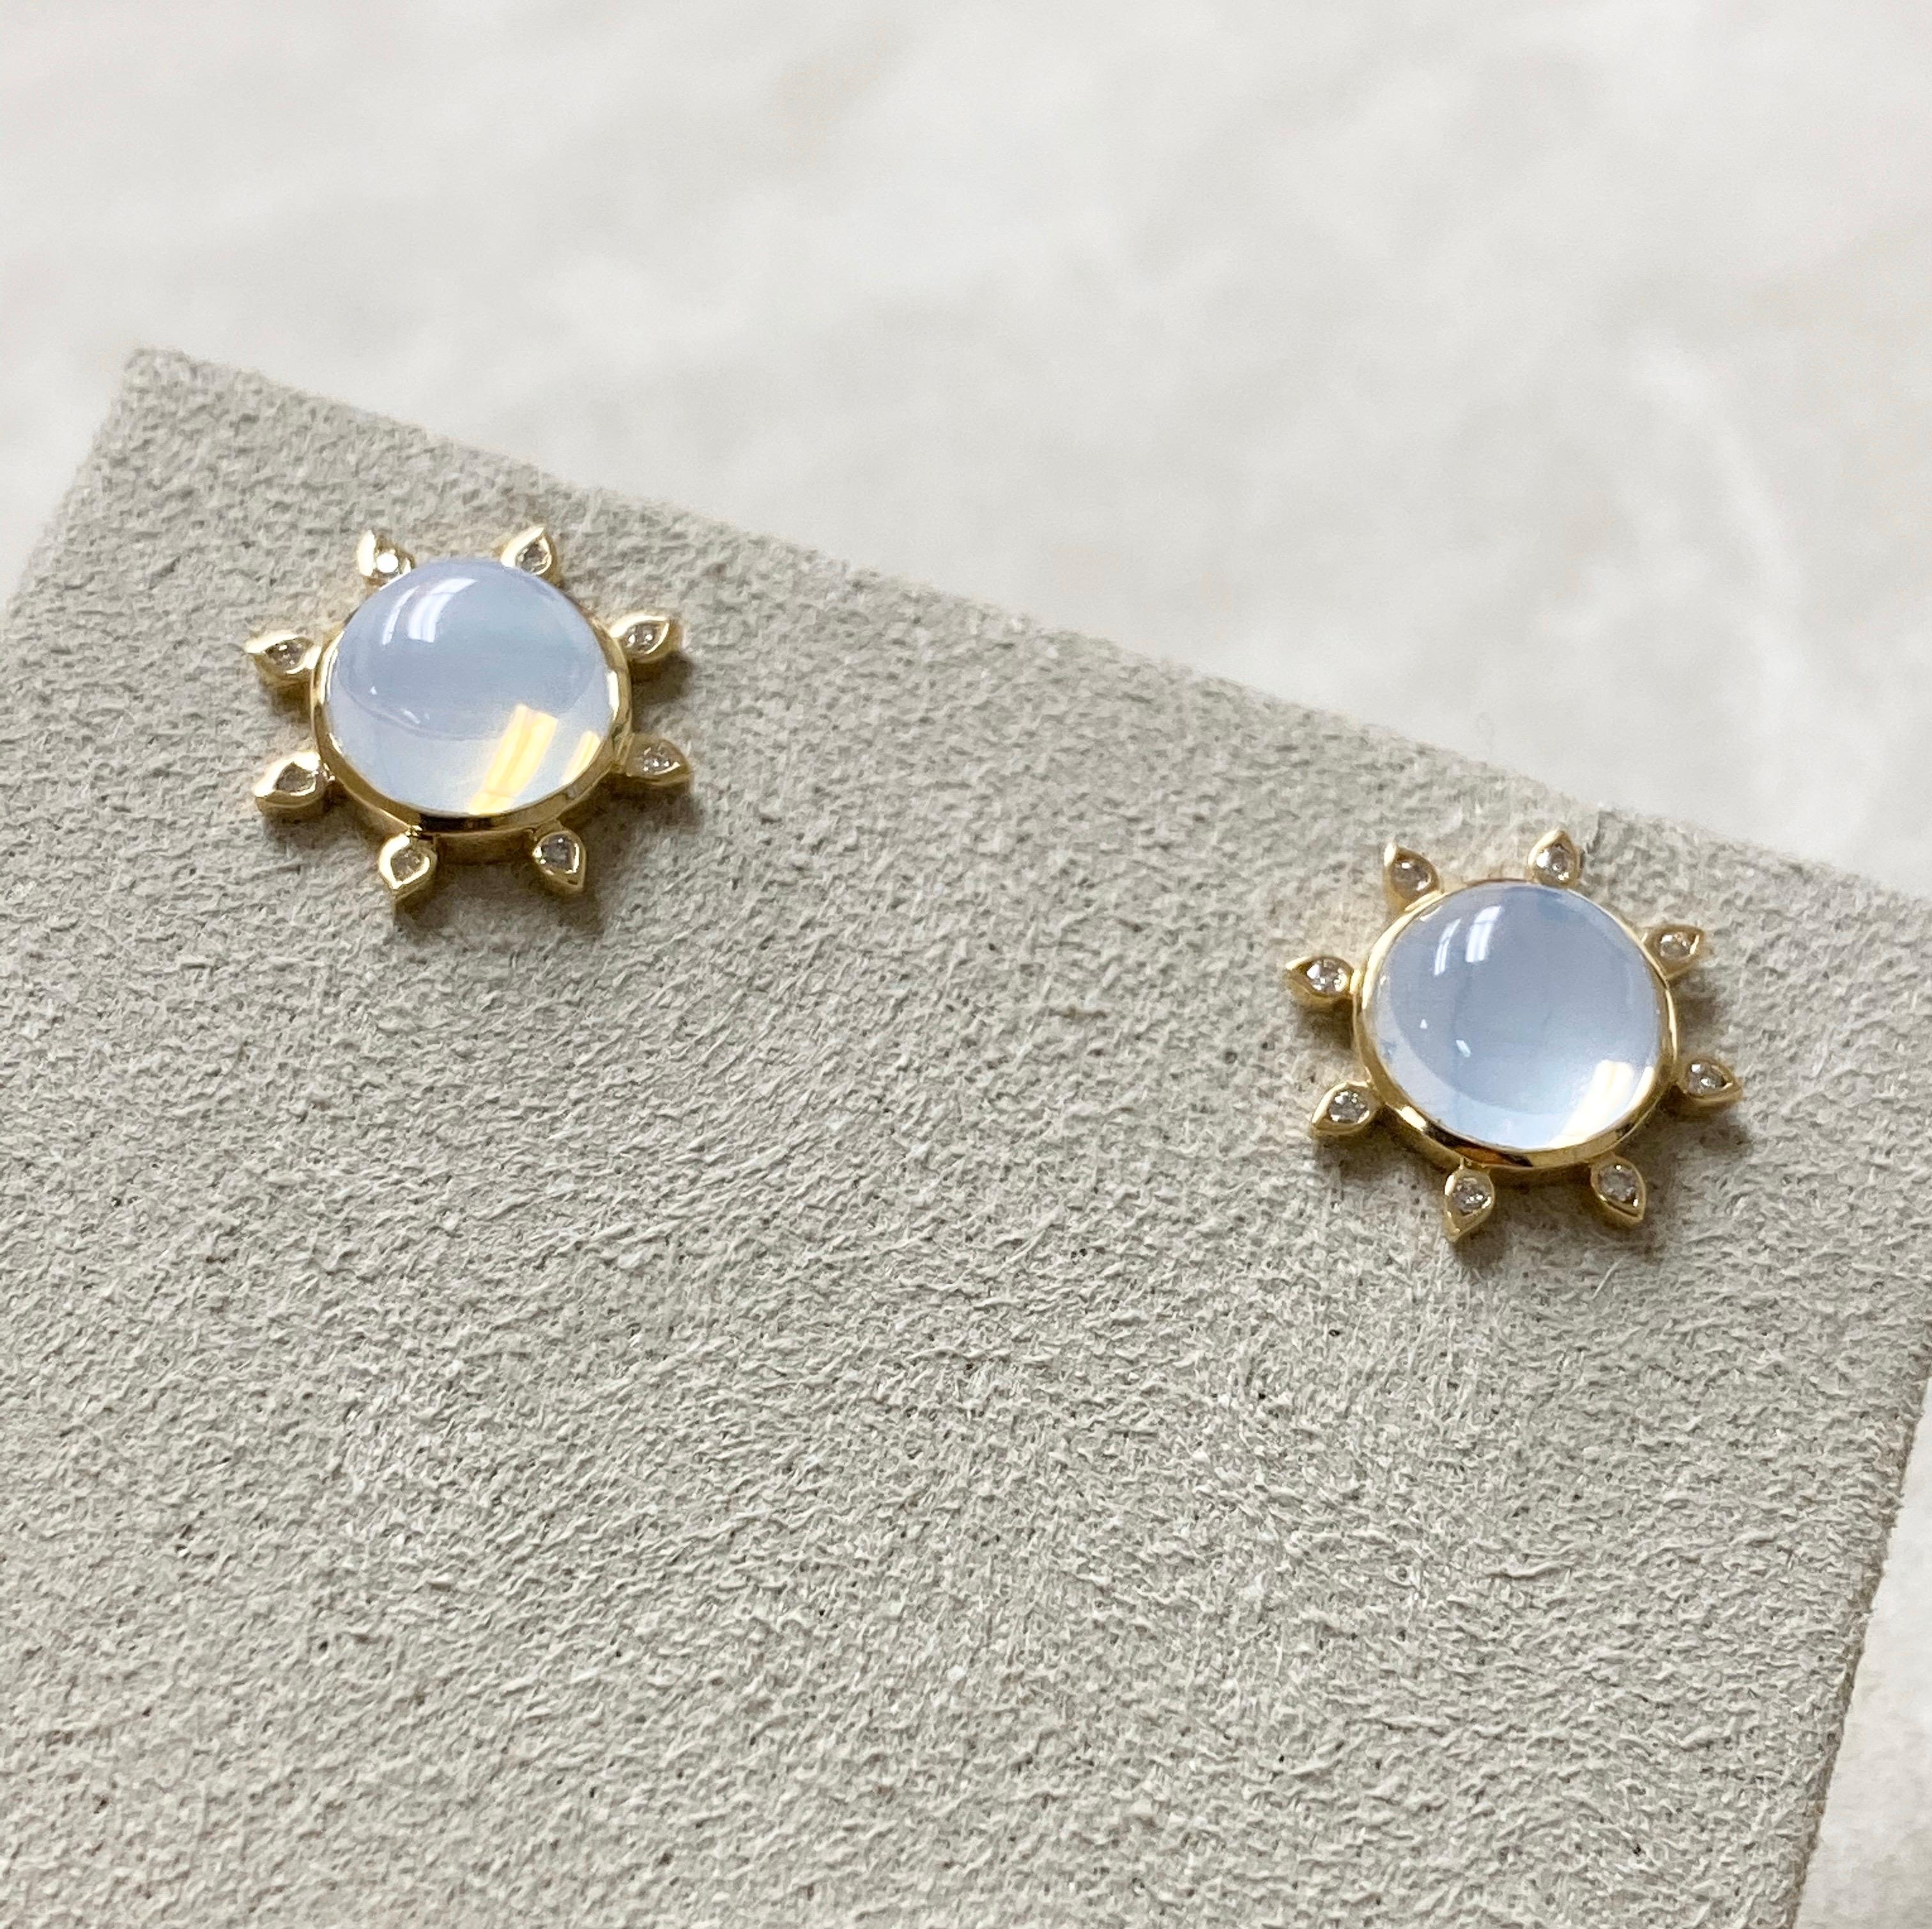 Created in 18 karat yellow gold
Moon quartz cabochons 4 cts approx
Diamonds 0.10 ct approx
Limited edition

These limited edition earrings feature glittering diamond accents illuminated by the luminous radiance of majestic candy blue topaz quartz